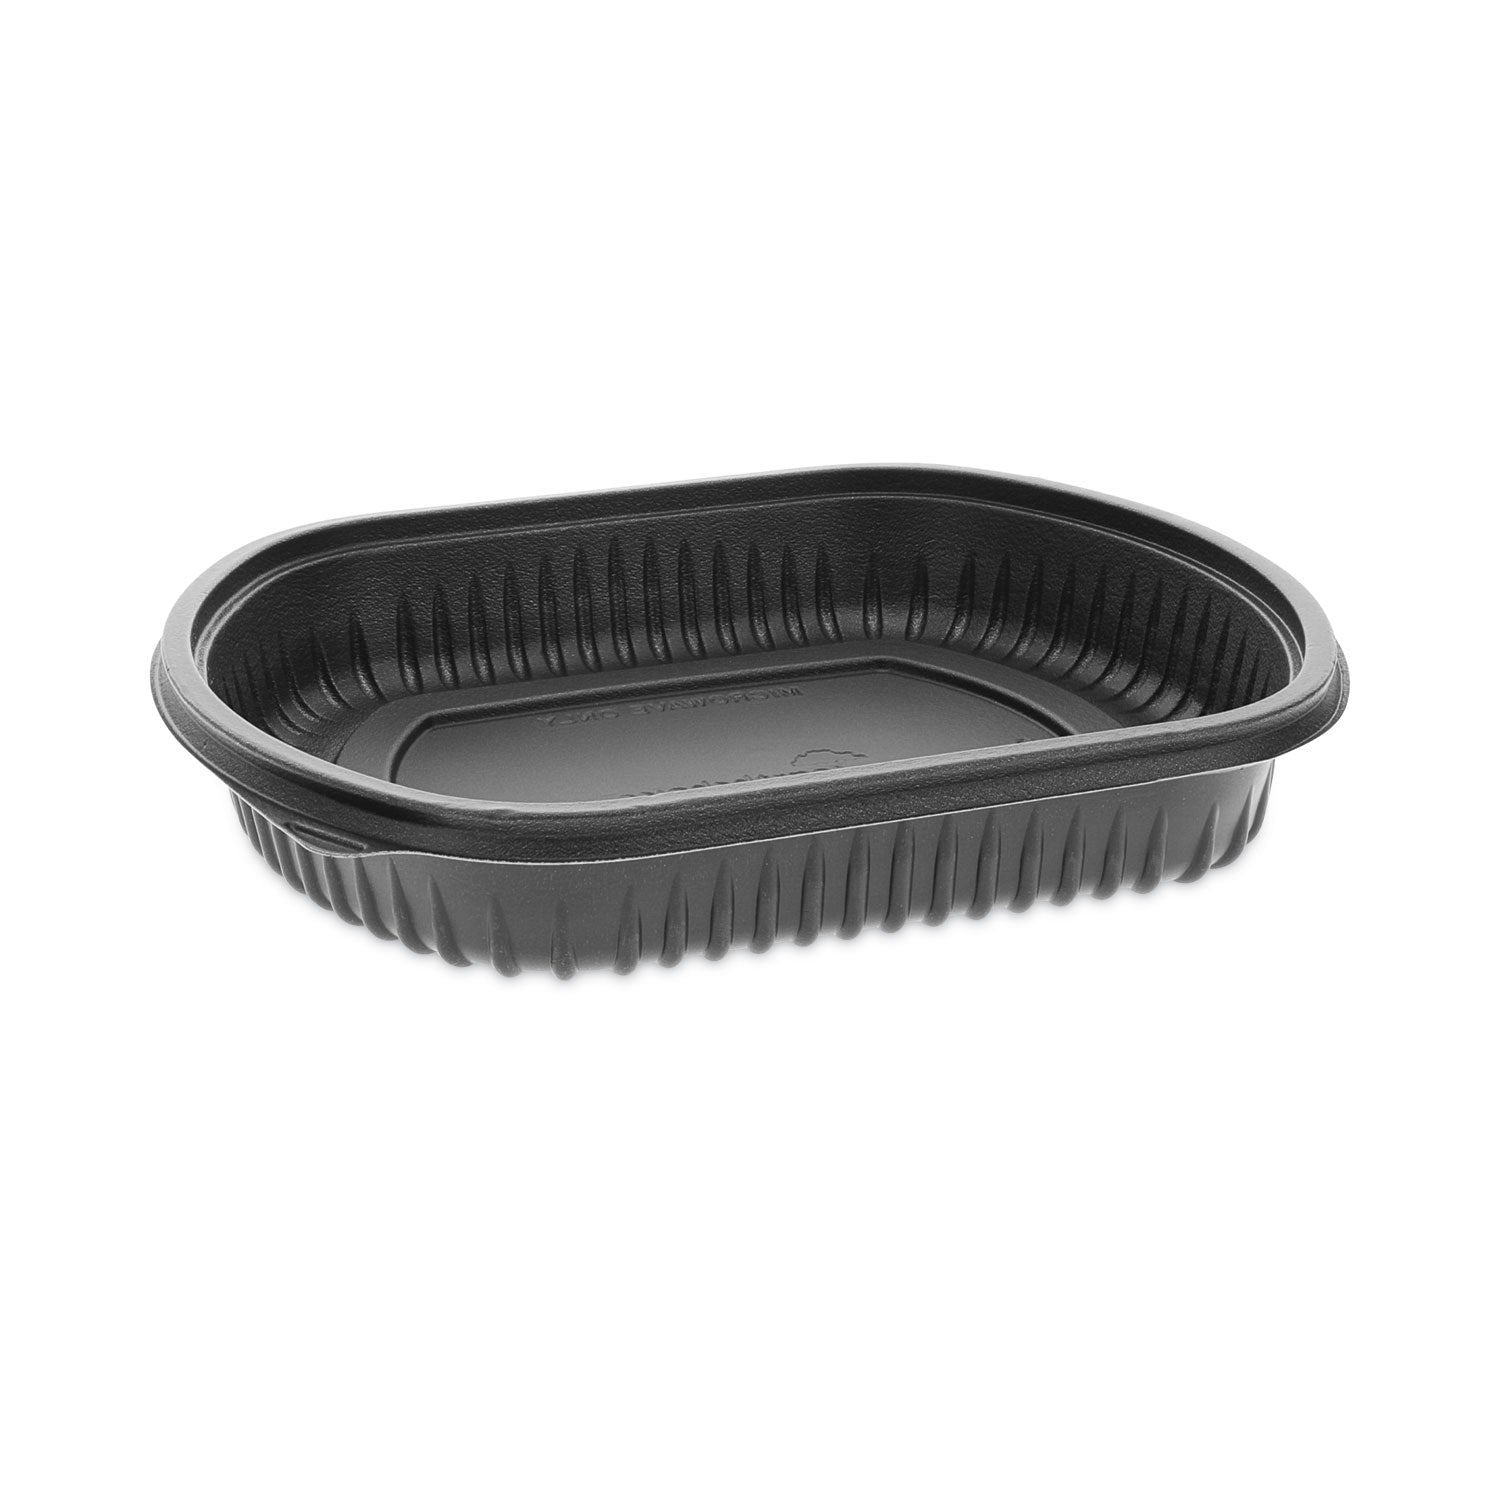 clearview-micromax-microwavable-container-36-oz-938-x-8-x-15-black-plastic-250-carton_pct0cn846360000 - 1